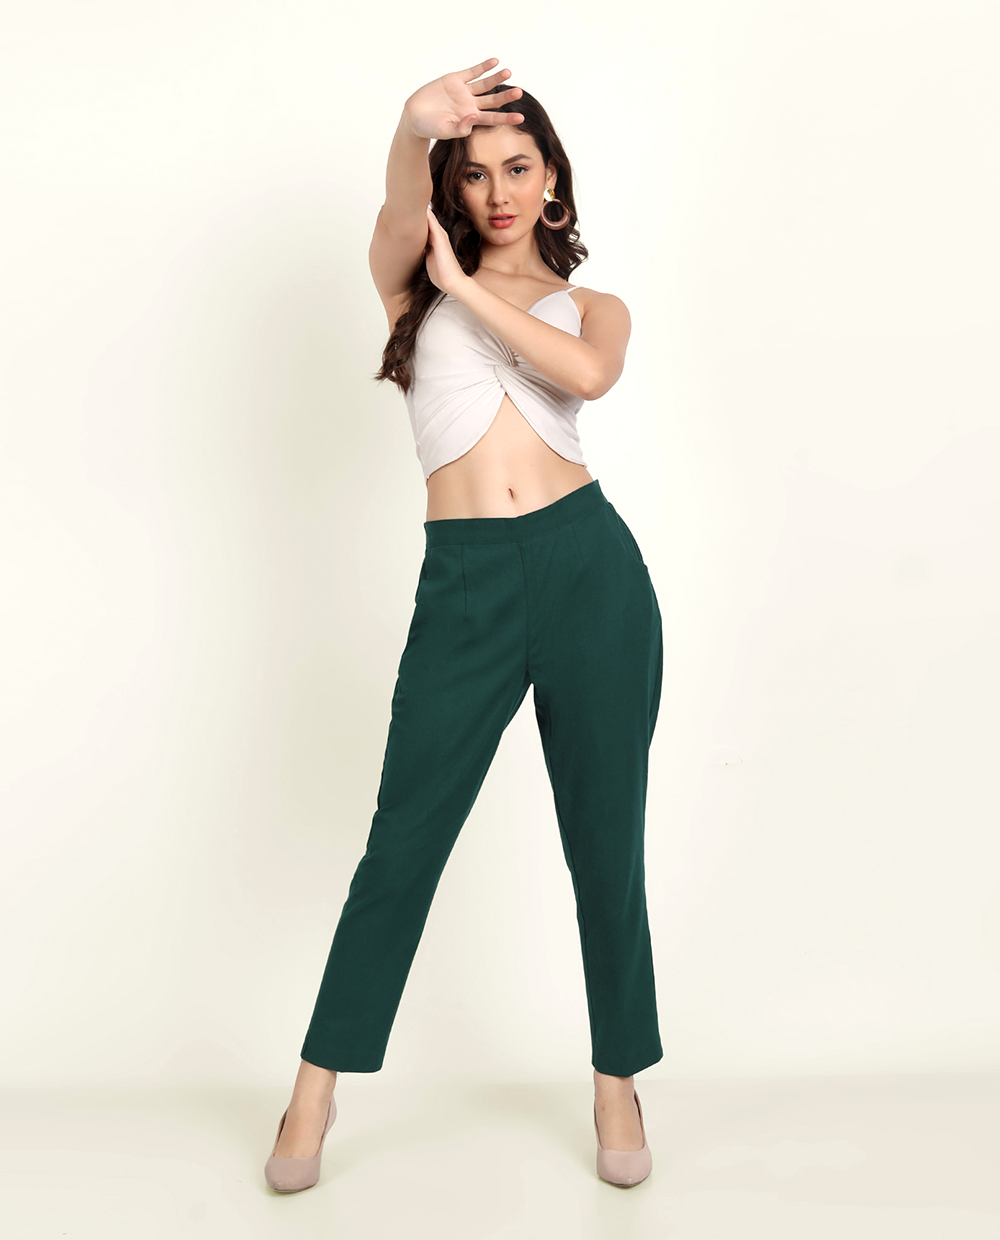 Emerald Green Trousers - Green Satin Trousers - High-Rise Pants - Lulus